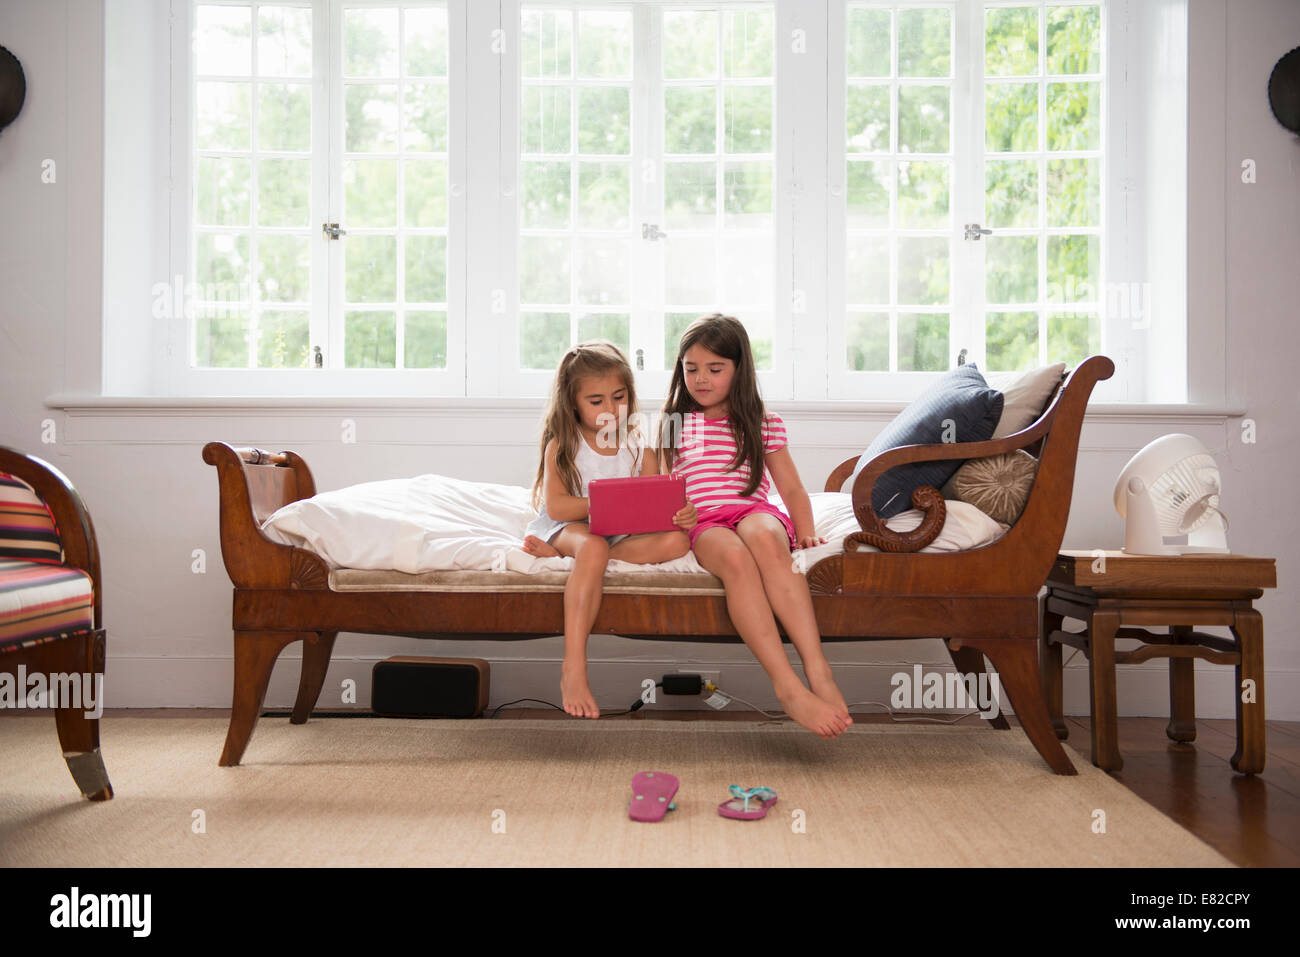 Two girls playing indoors, looking at a digital tablet. Stock Photo